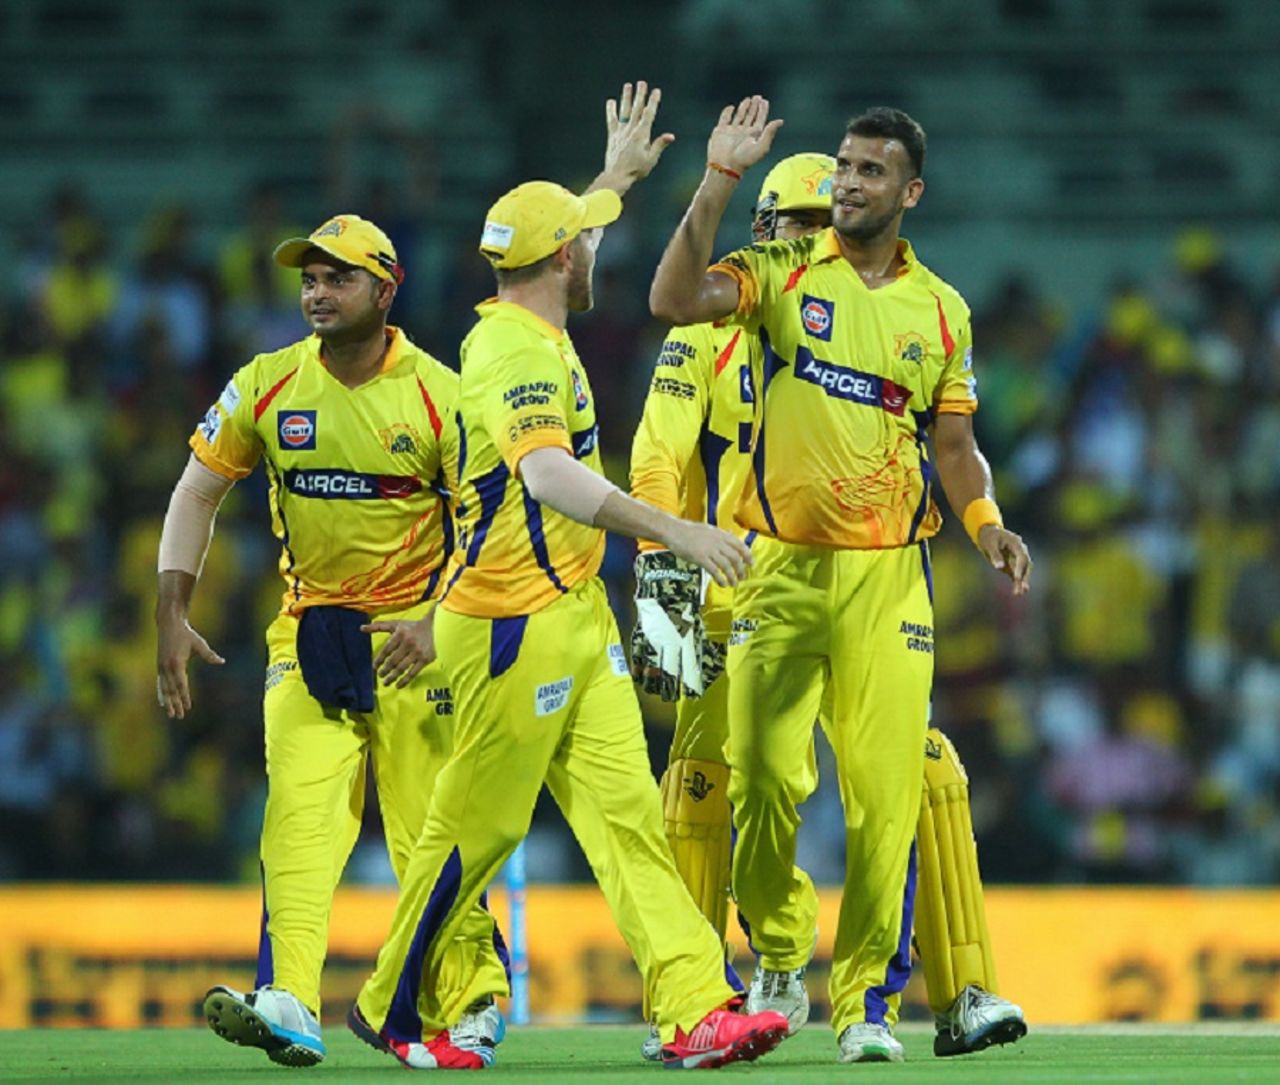 Ishwar Pandey is congratulated on the wicket of AB de Villiers, Chennai Super Kings v Royal Challengers Bangalore, IPL 2015, Chennai, May 4, 2015